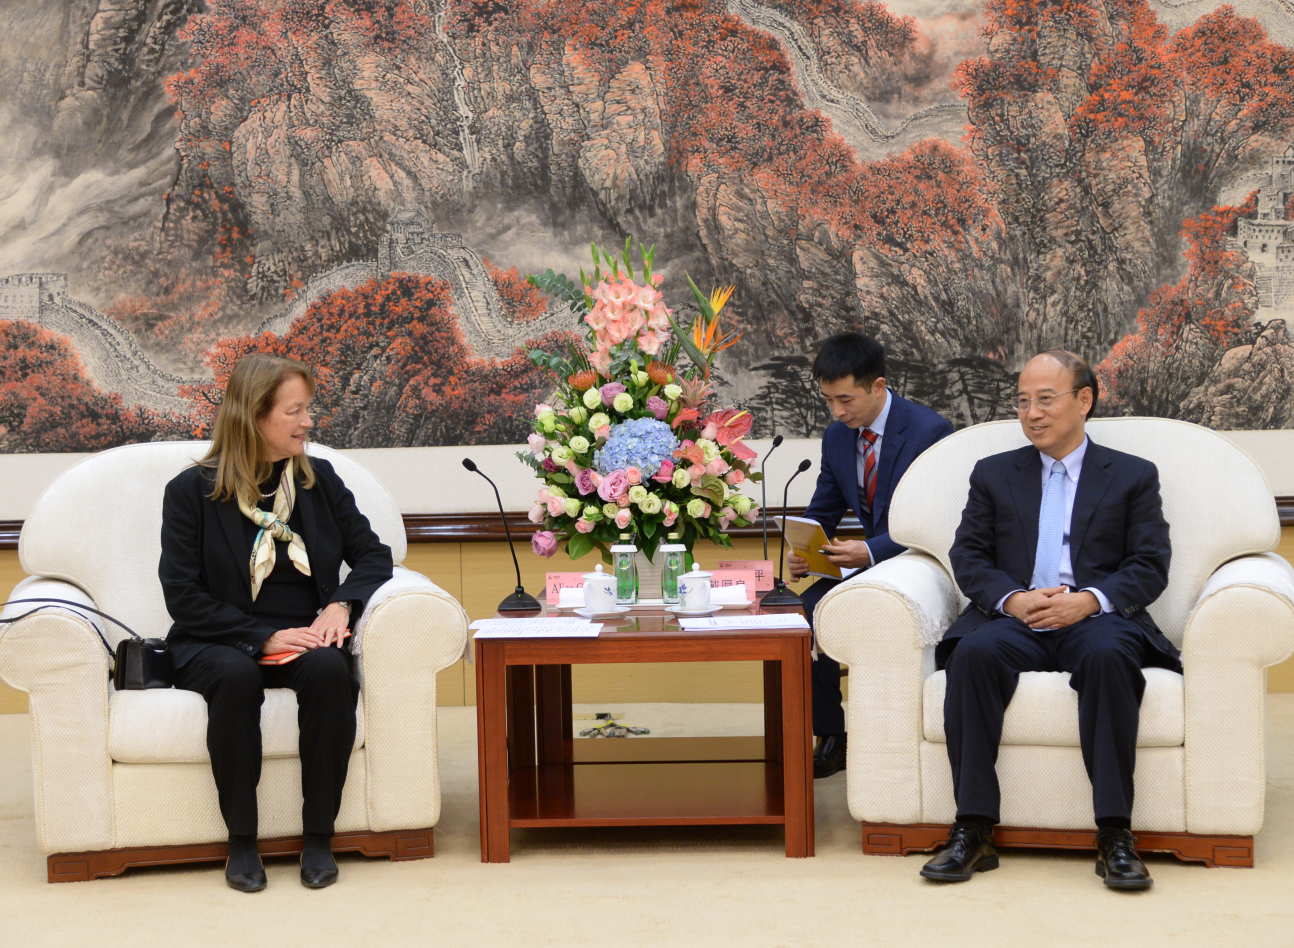 Professor Alice Gast with Sinopec Chair Houliang Dai 